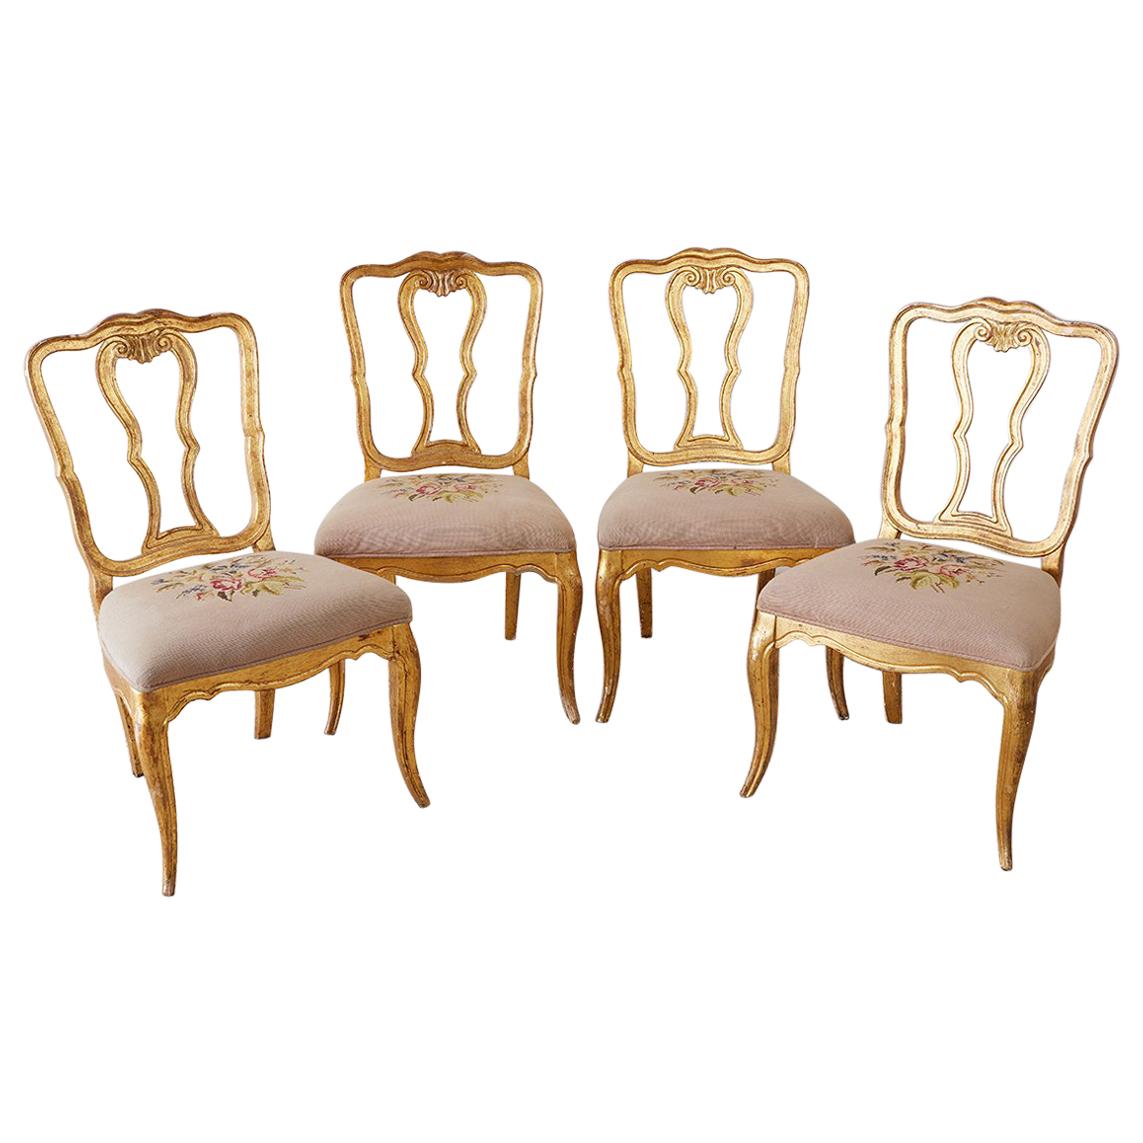 Set of Four Italian Giltwood Venetian Style Dining Chairs